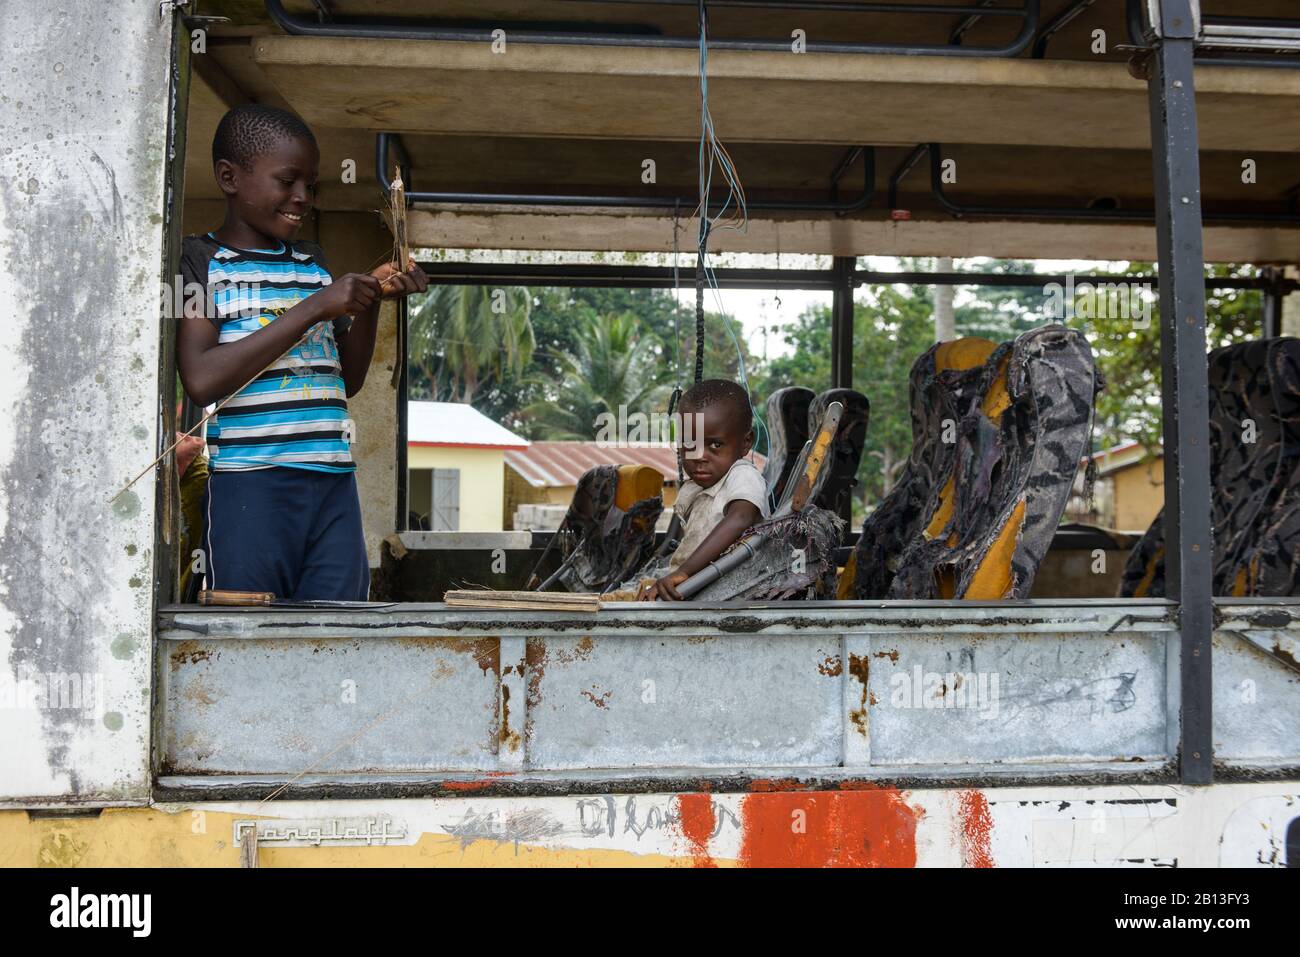 Children are playing in an old bus,Democratic Republic of the Congo,Africa Stock Photo